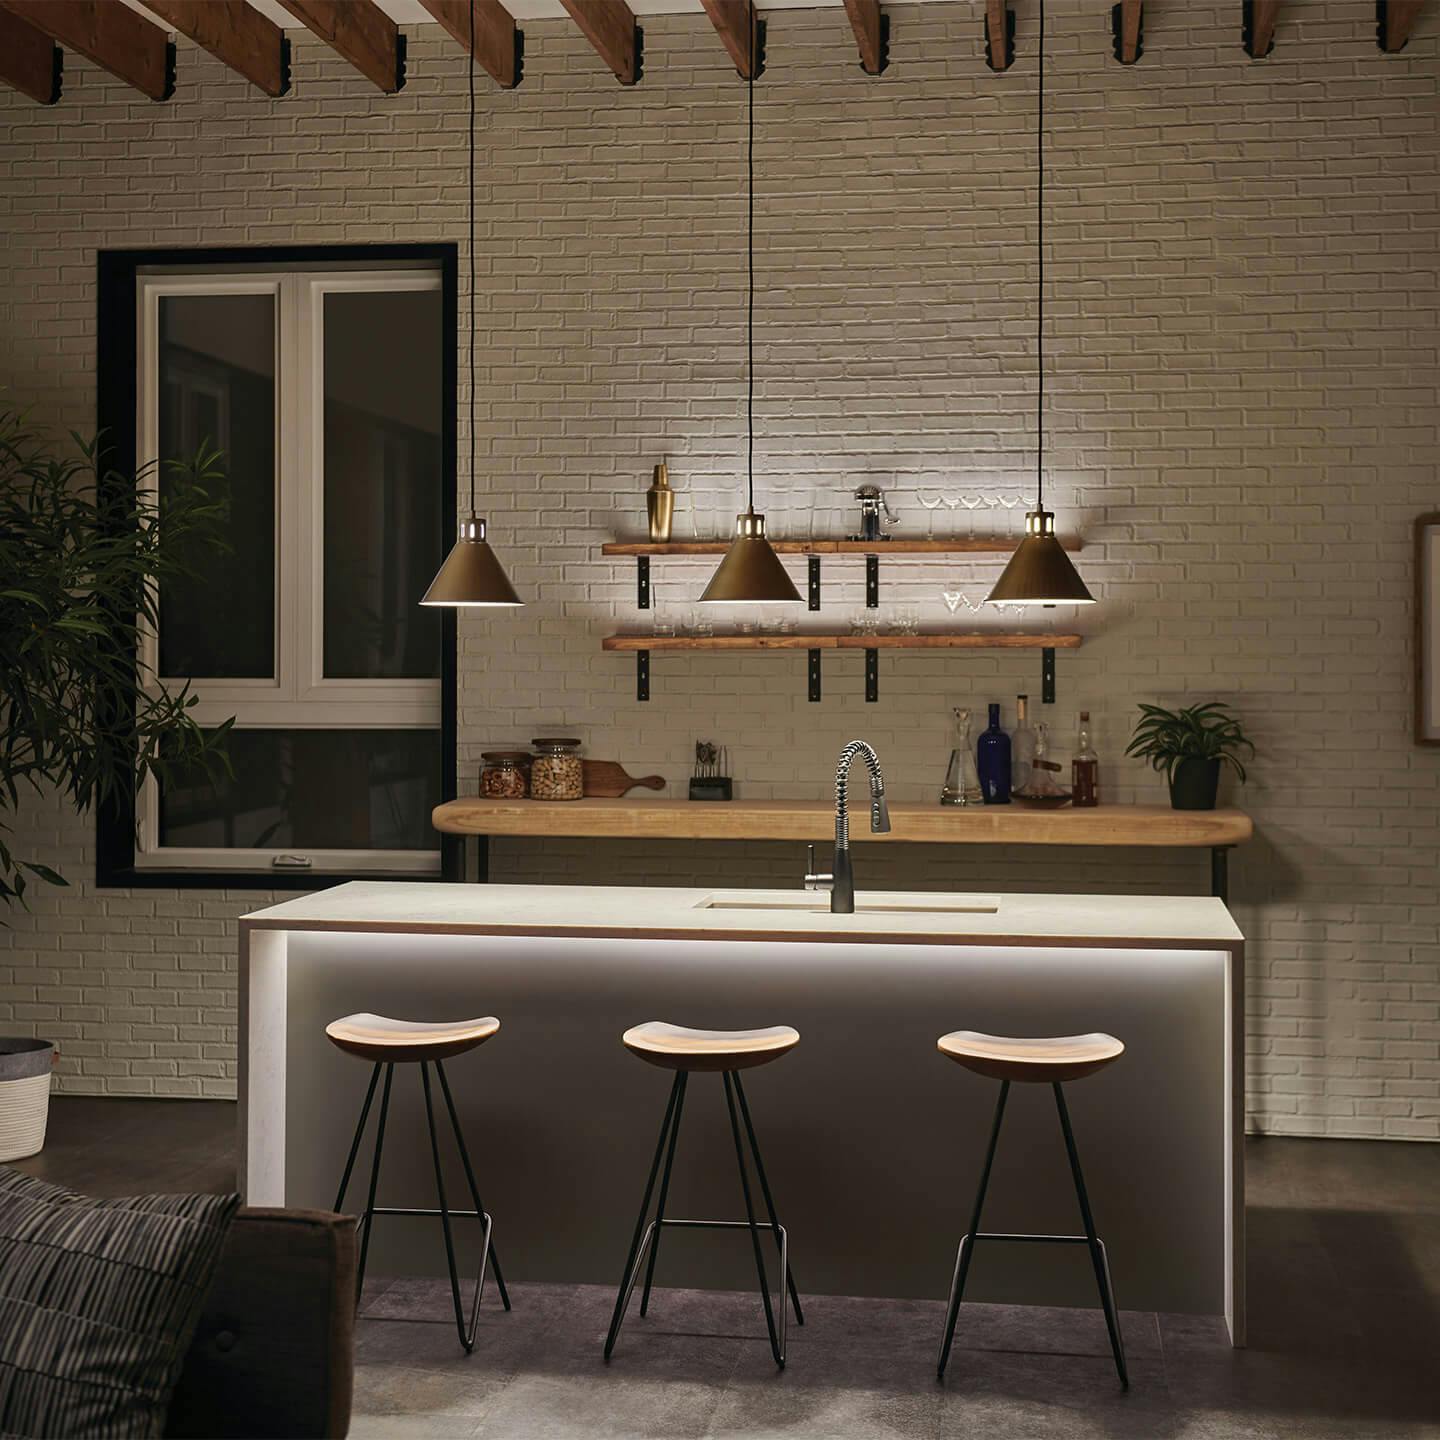 Home bar at night with three Zailey pendant lights hanging